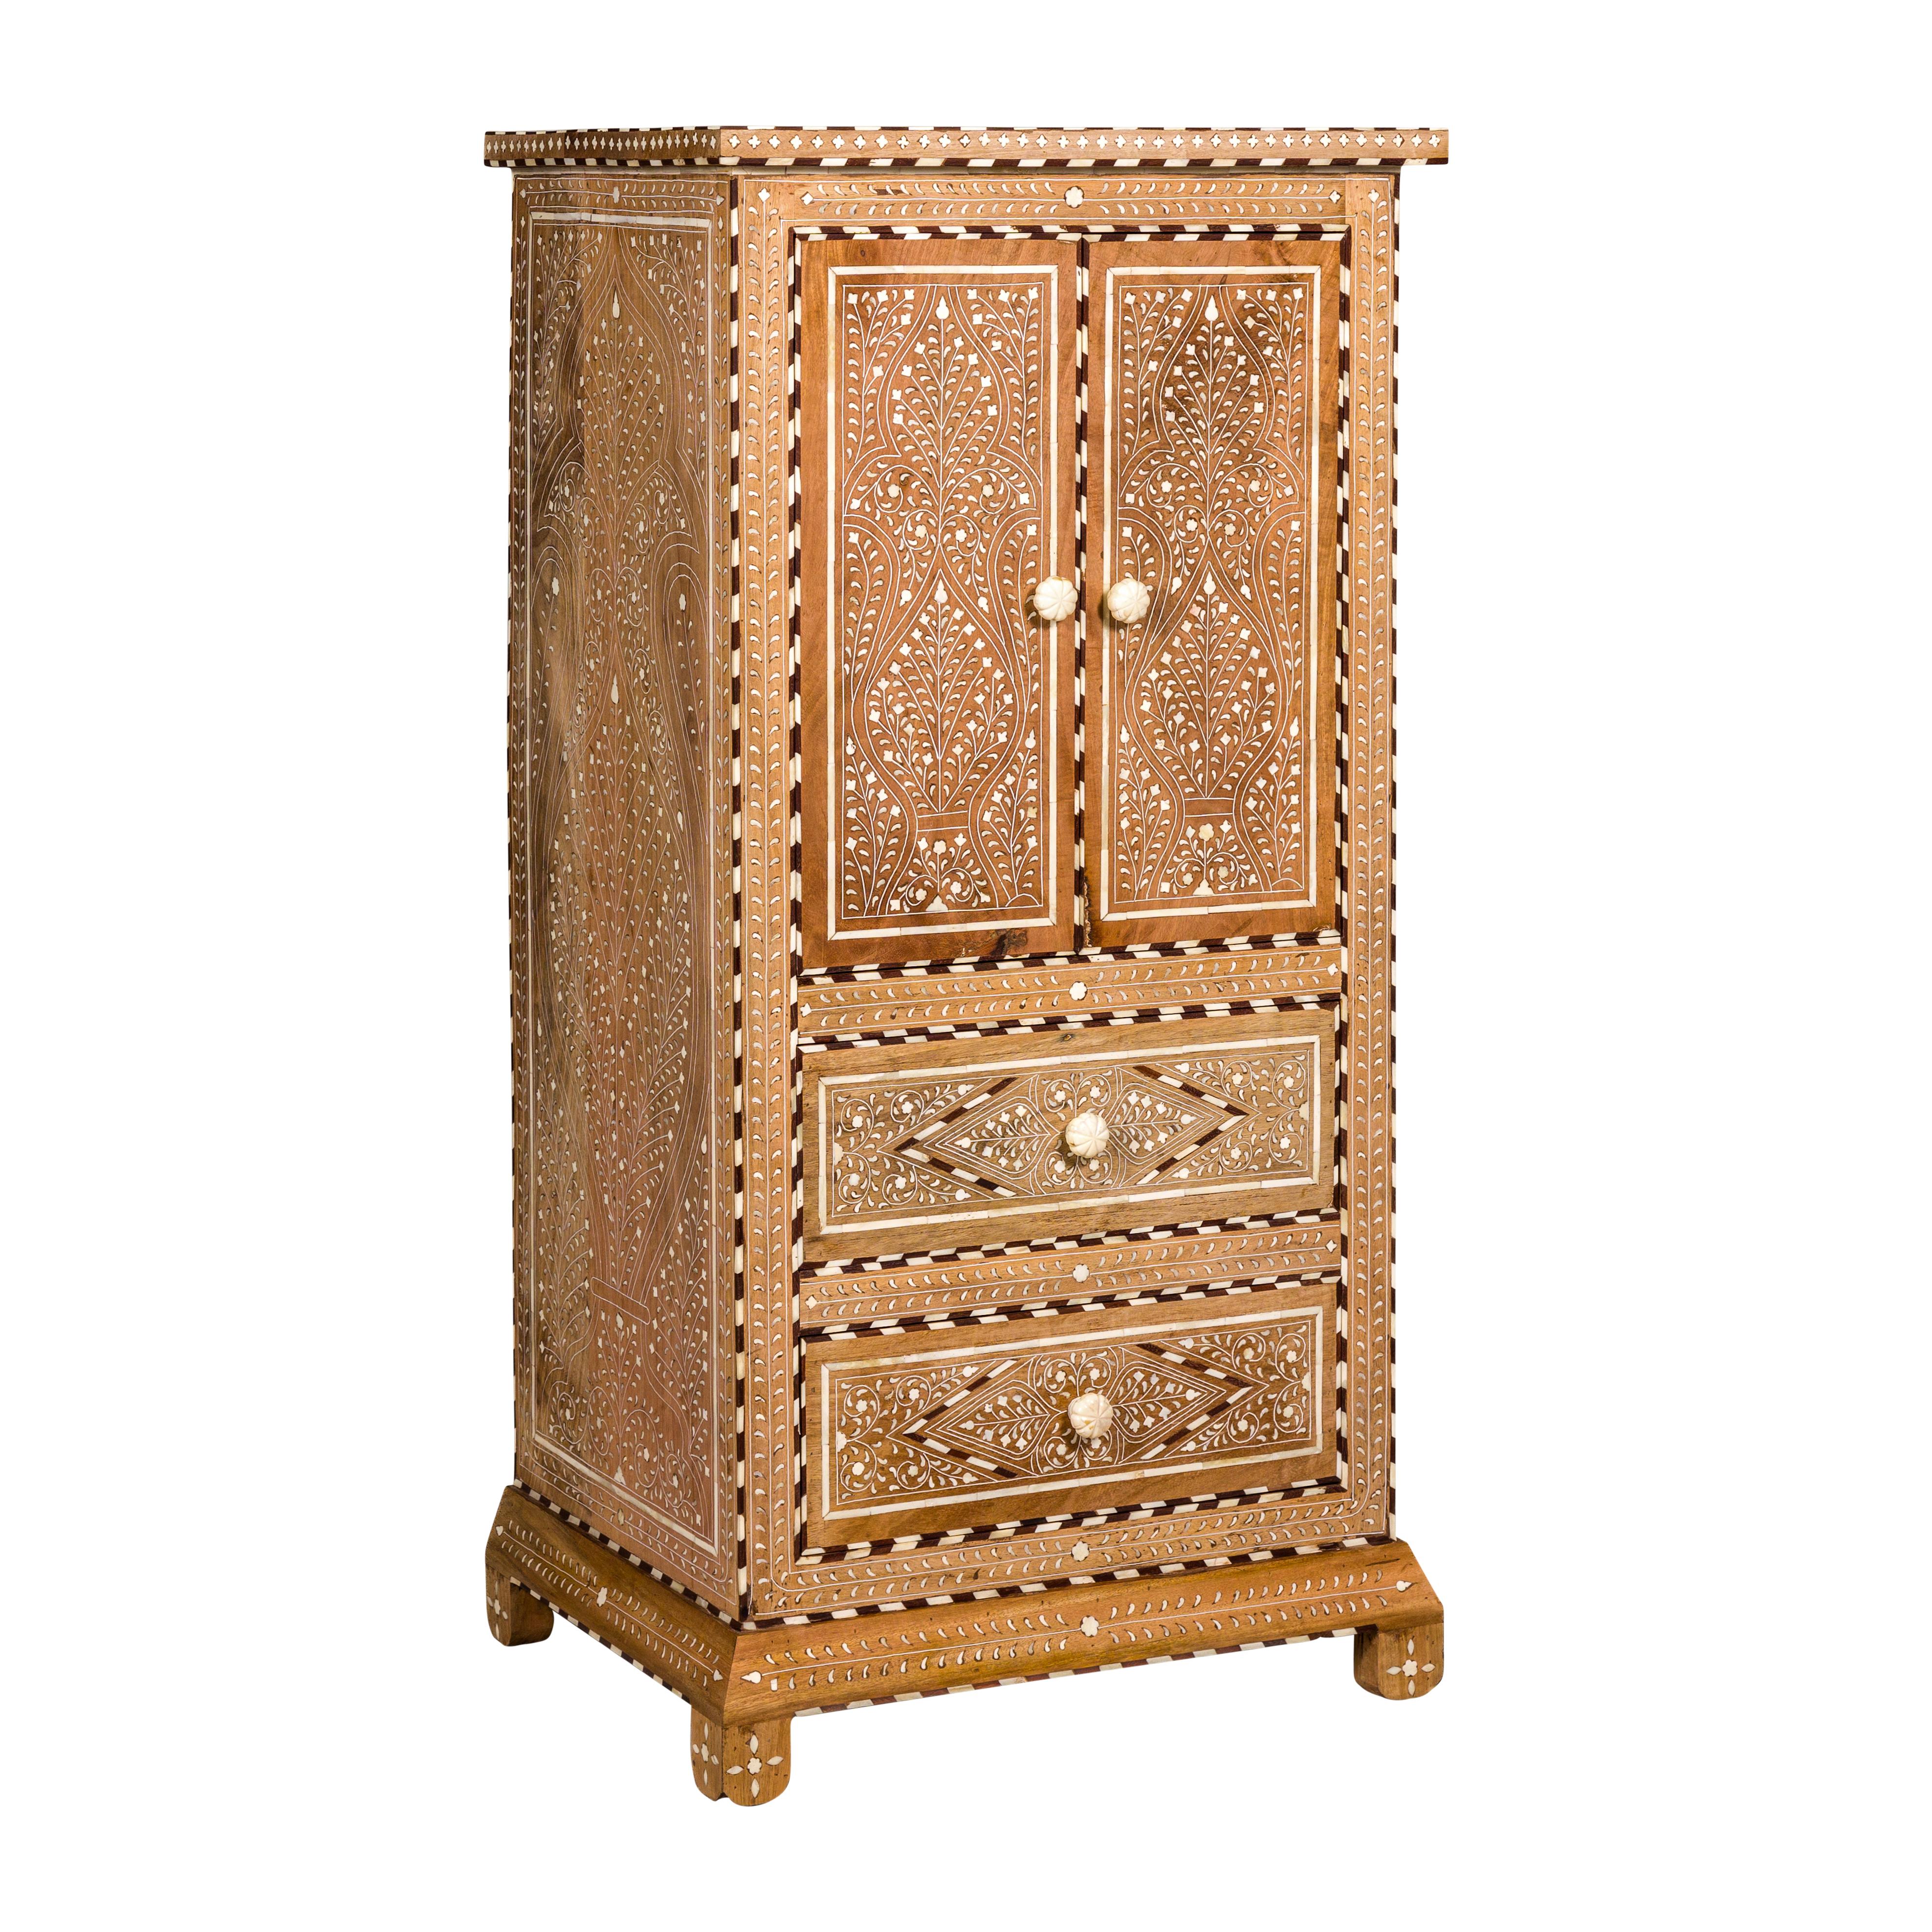 Anglo Indian Style Narrow Cabinet with Foliage-Themed Bone Inlaid Décor For Sale 12